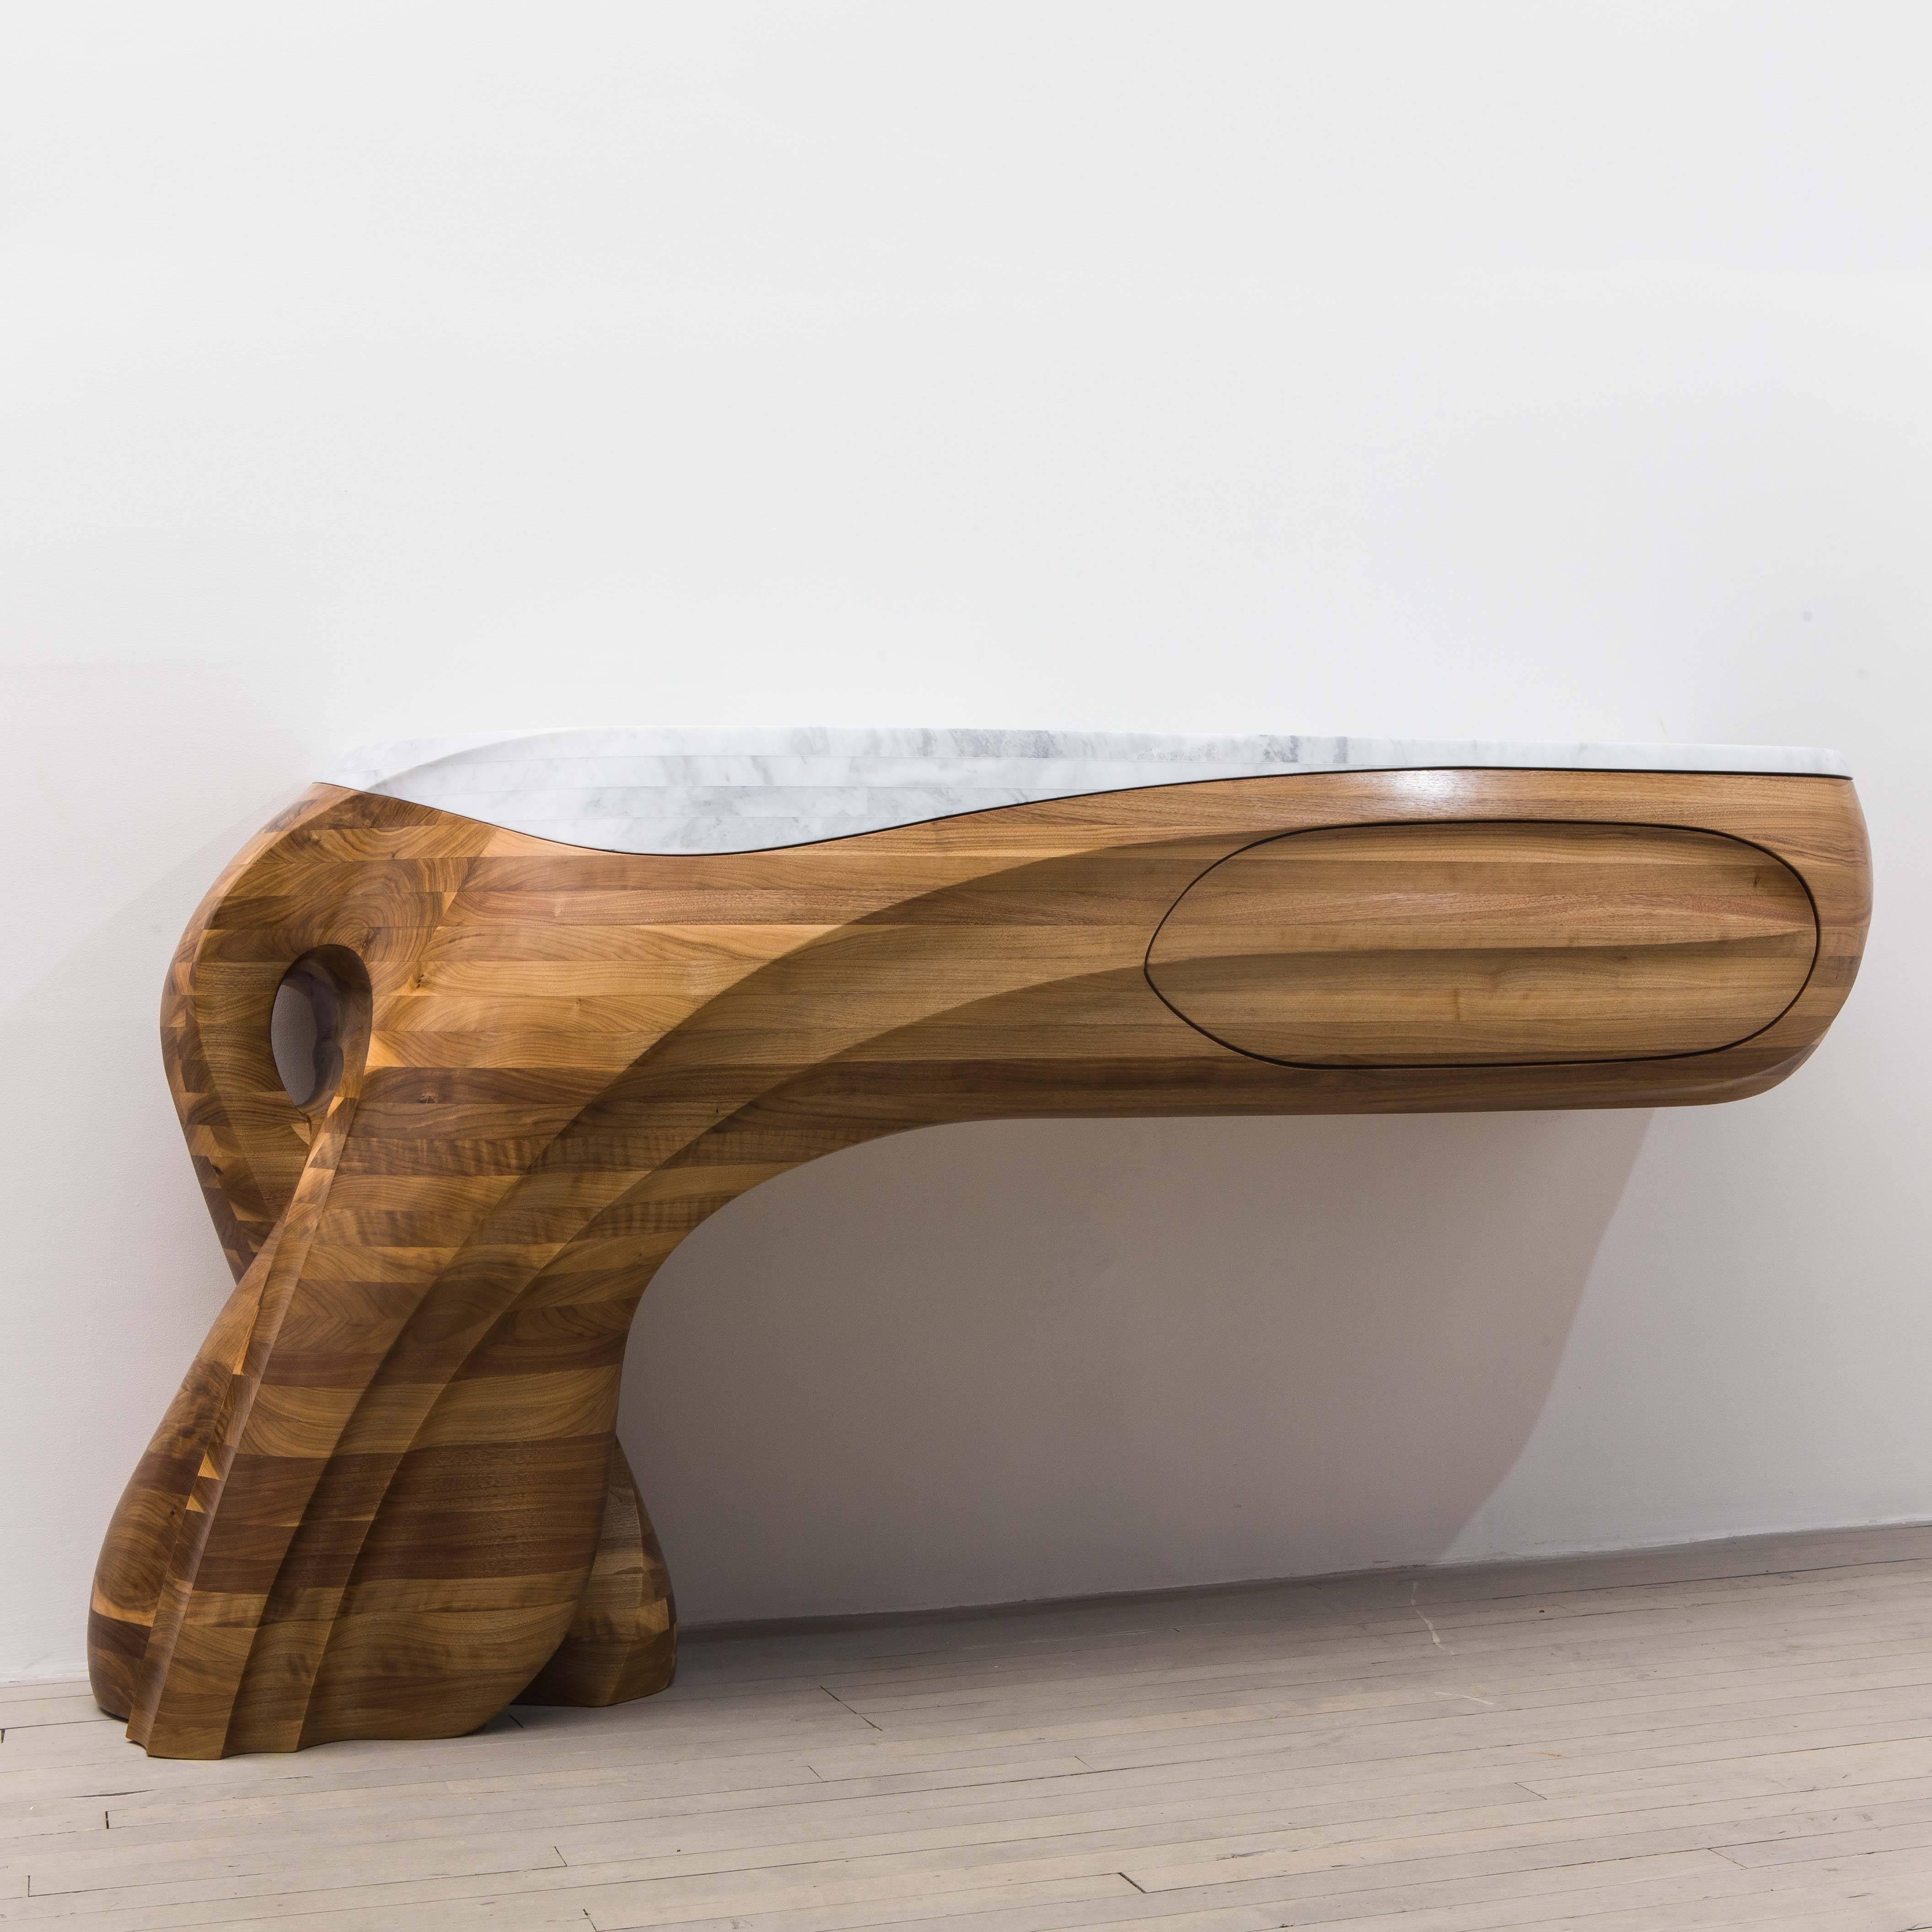 At once a sublime work of art and a functional object, BANG III is a unique, hand-carved console that defies easy categorization. Markus Haase’s two decades of experience as a sculptor are evident in his masterful treatment of materials, where